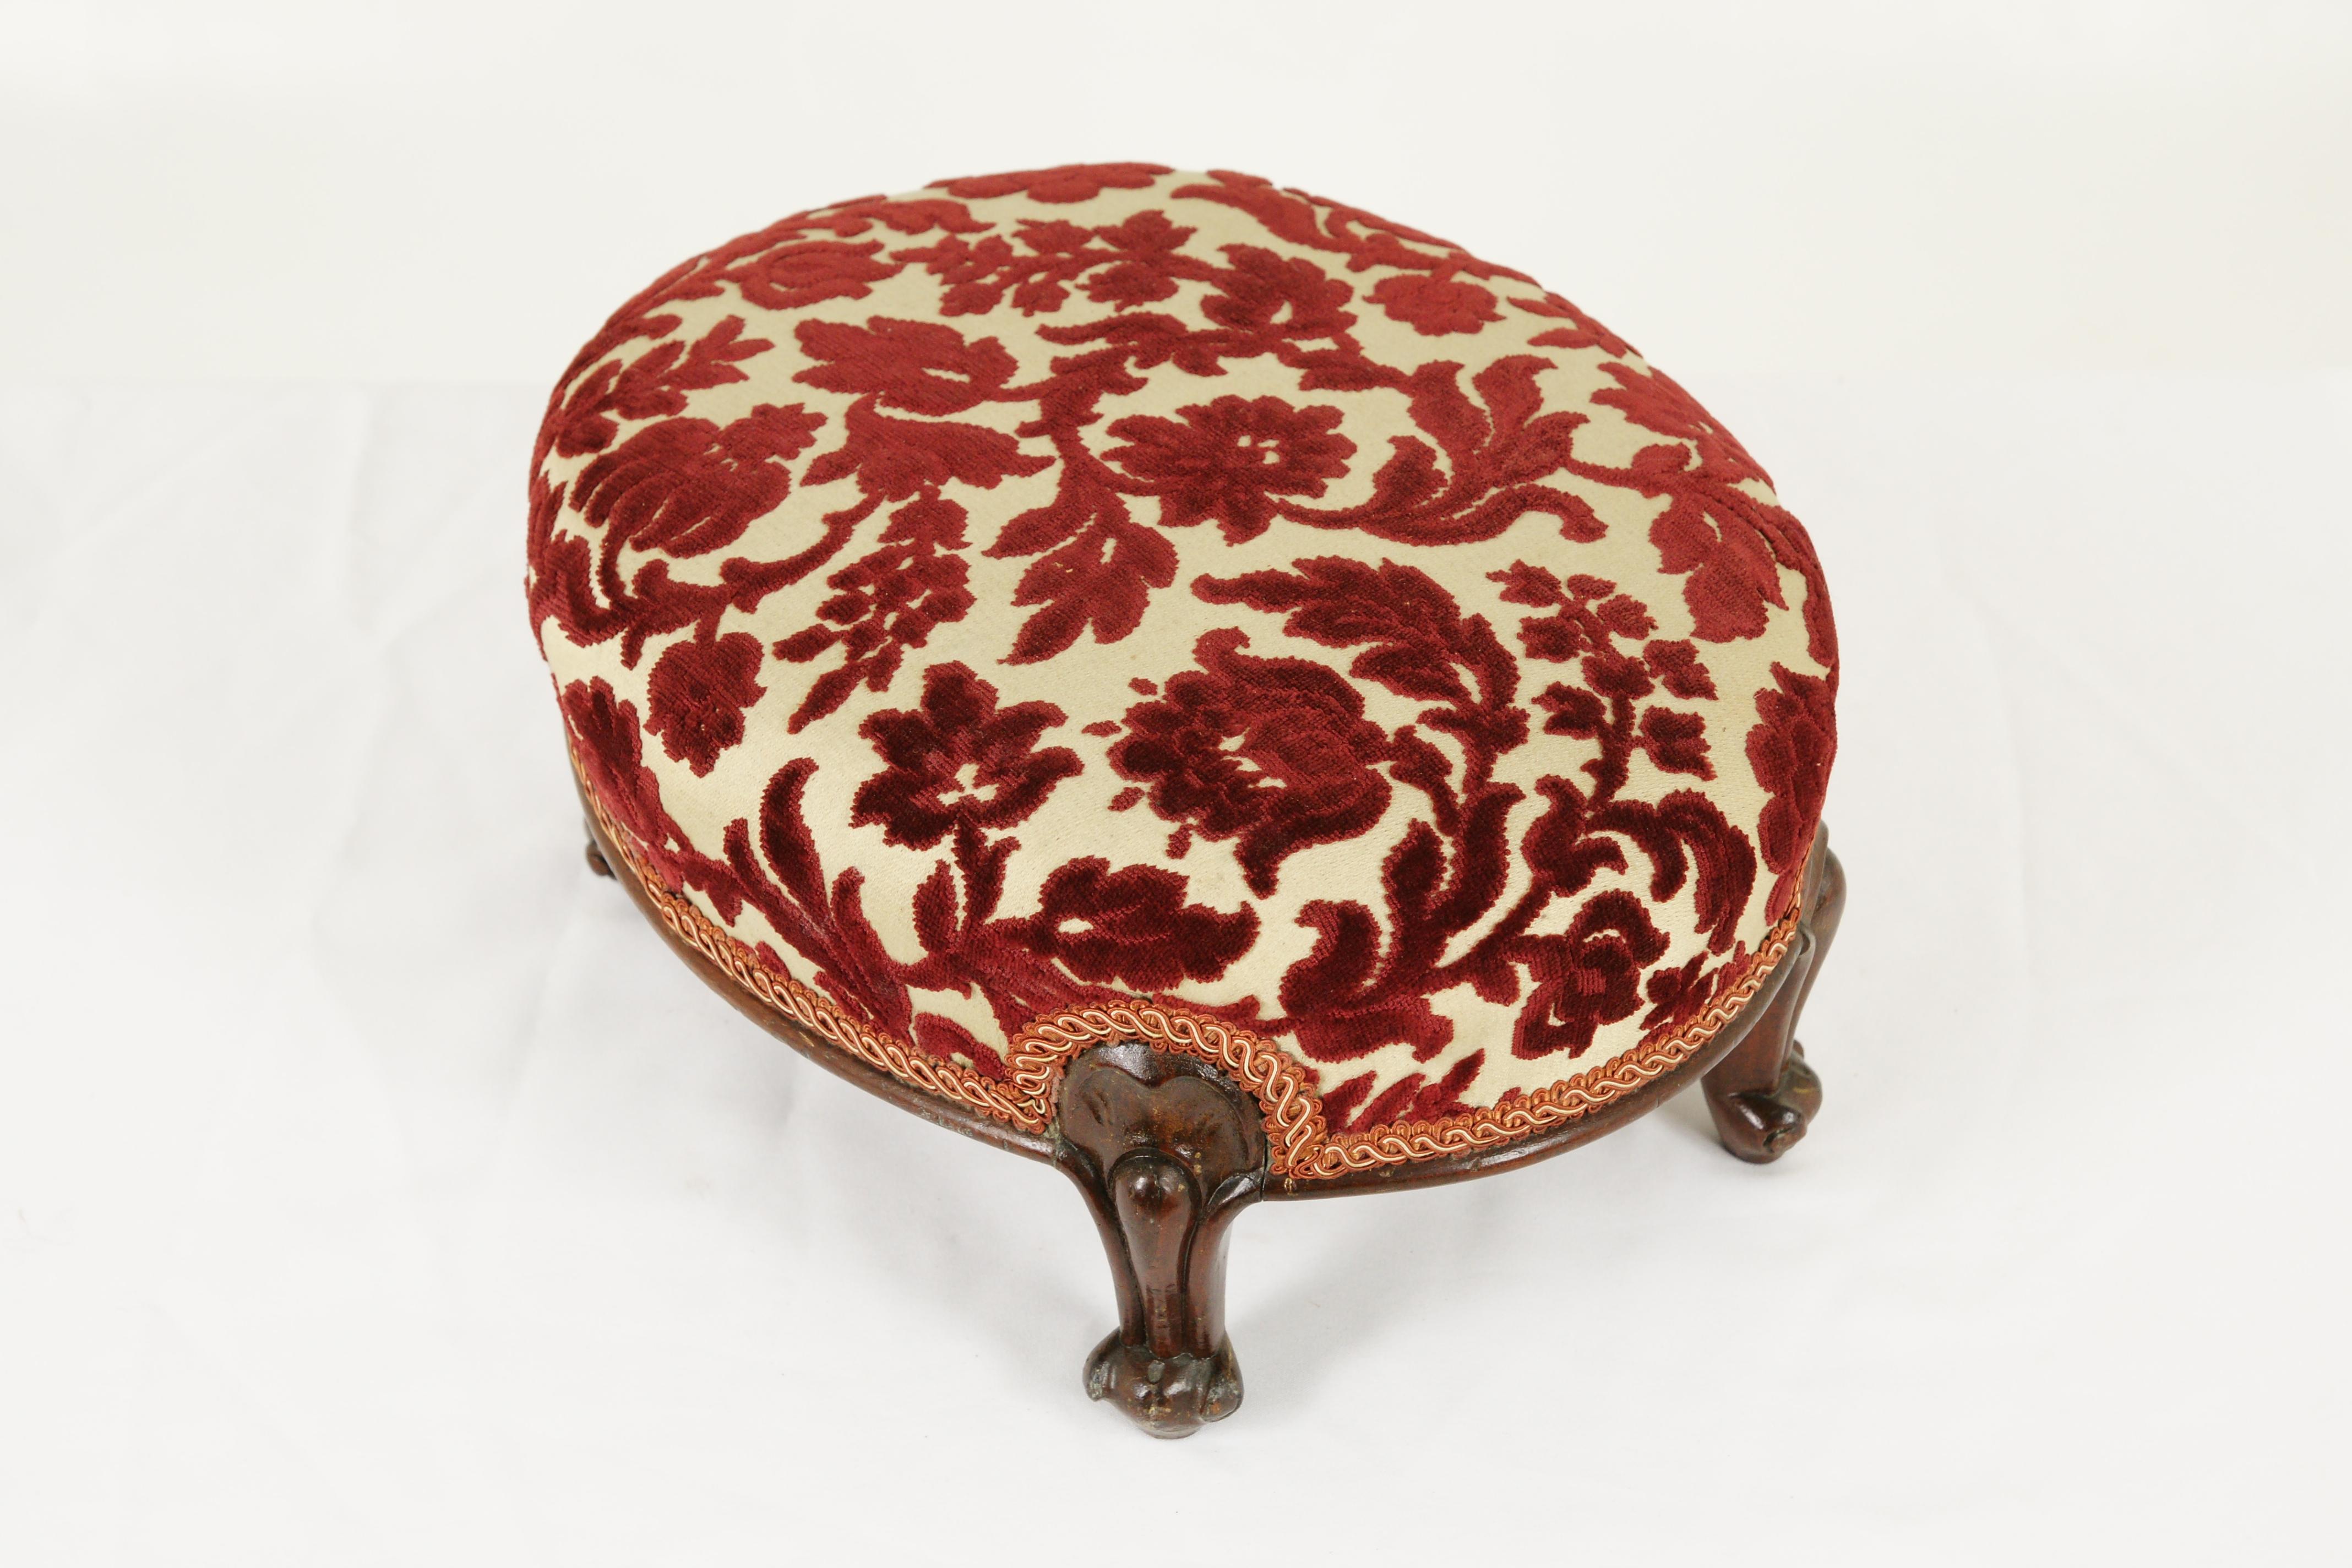 Antique footstool, carved walnut footstool, Victorian, Scotland 1880, Antique Furniture, B1702

Scotland, 1880
solid walnut with original finish
oval shaped
upholstered top with mohair fabric
sitting on miniature carved cabriole legs
wonderful